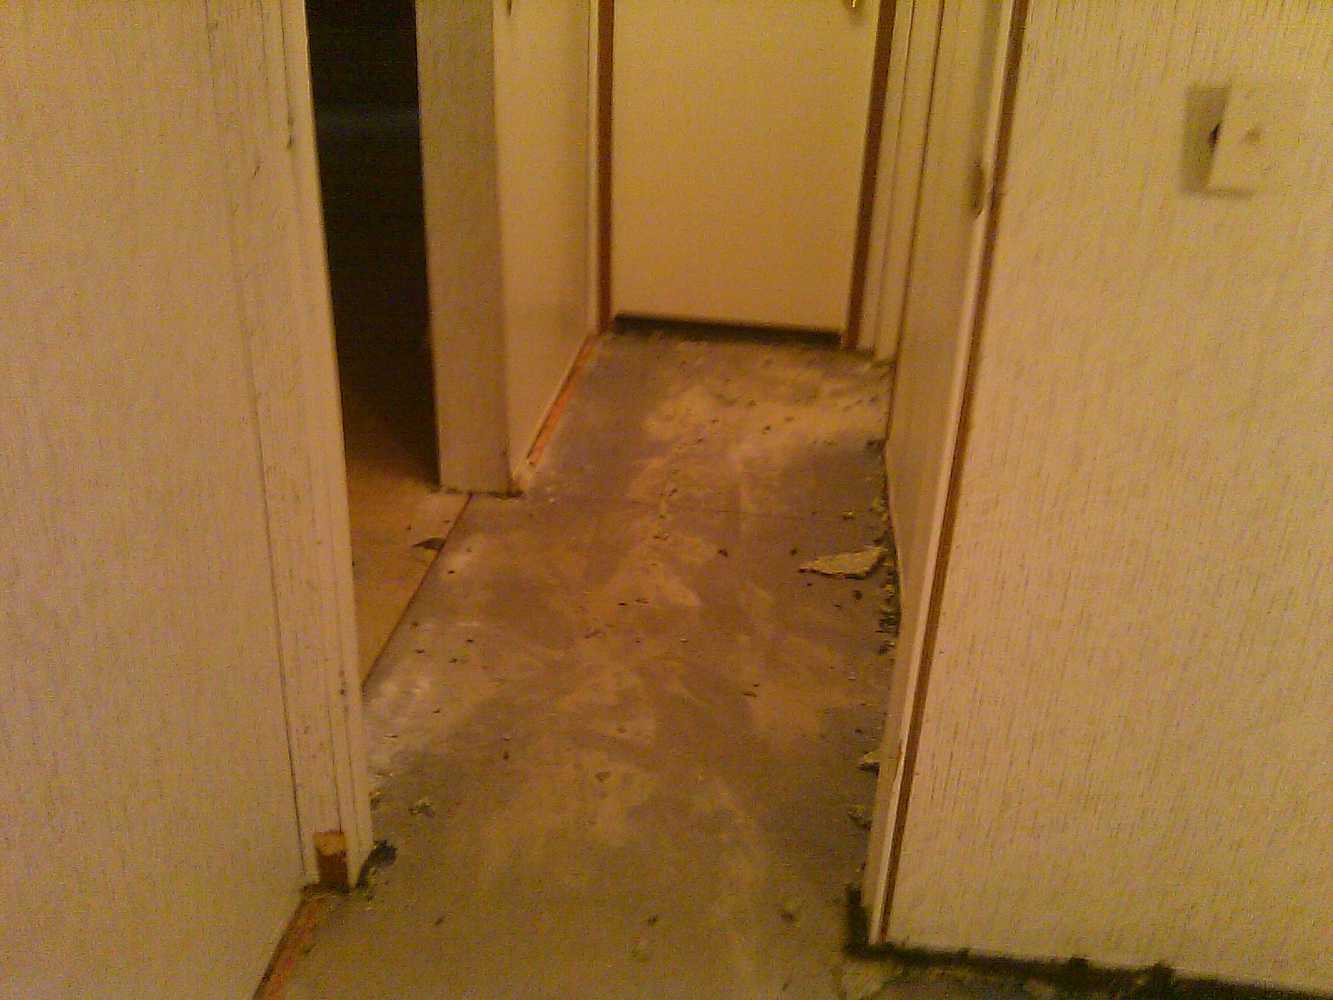 Complete renovation due to mold infestation. 